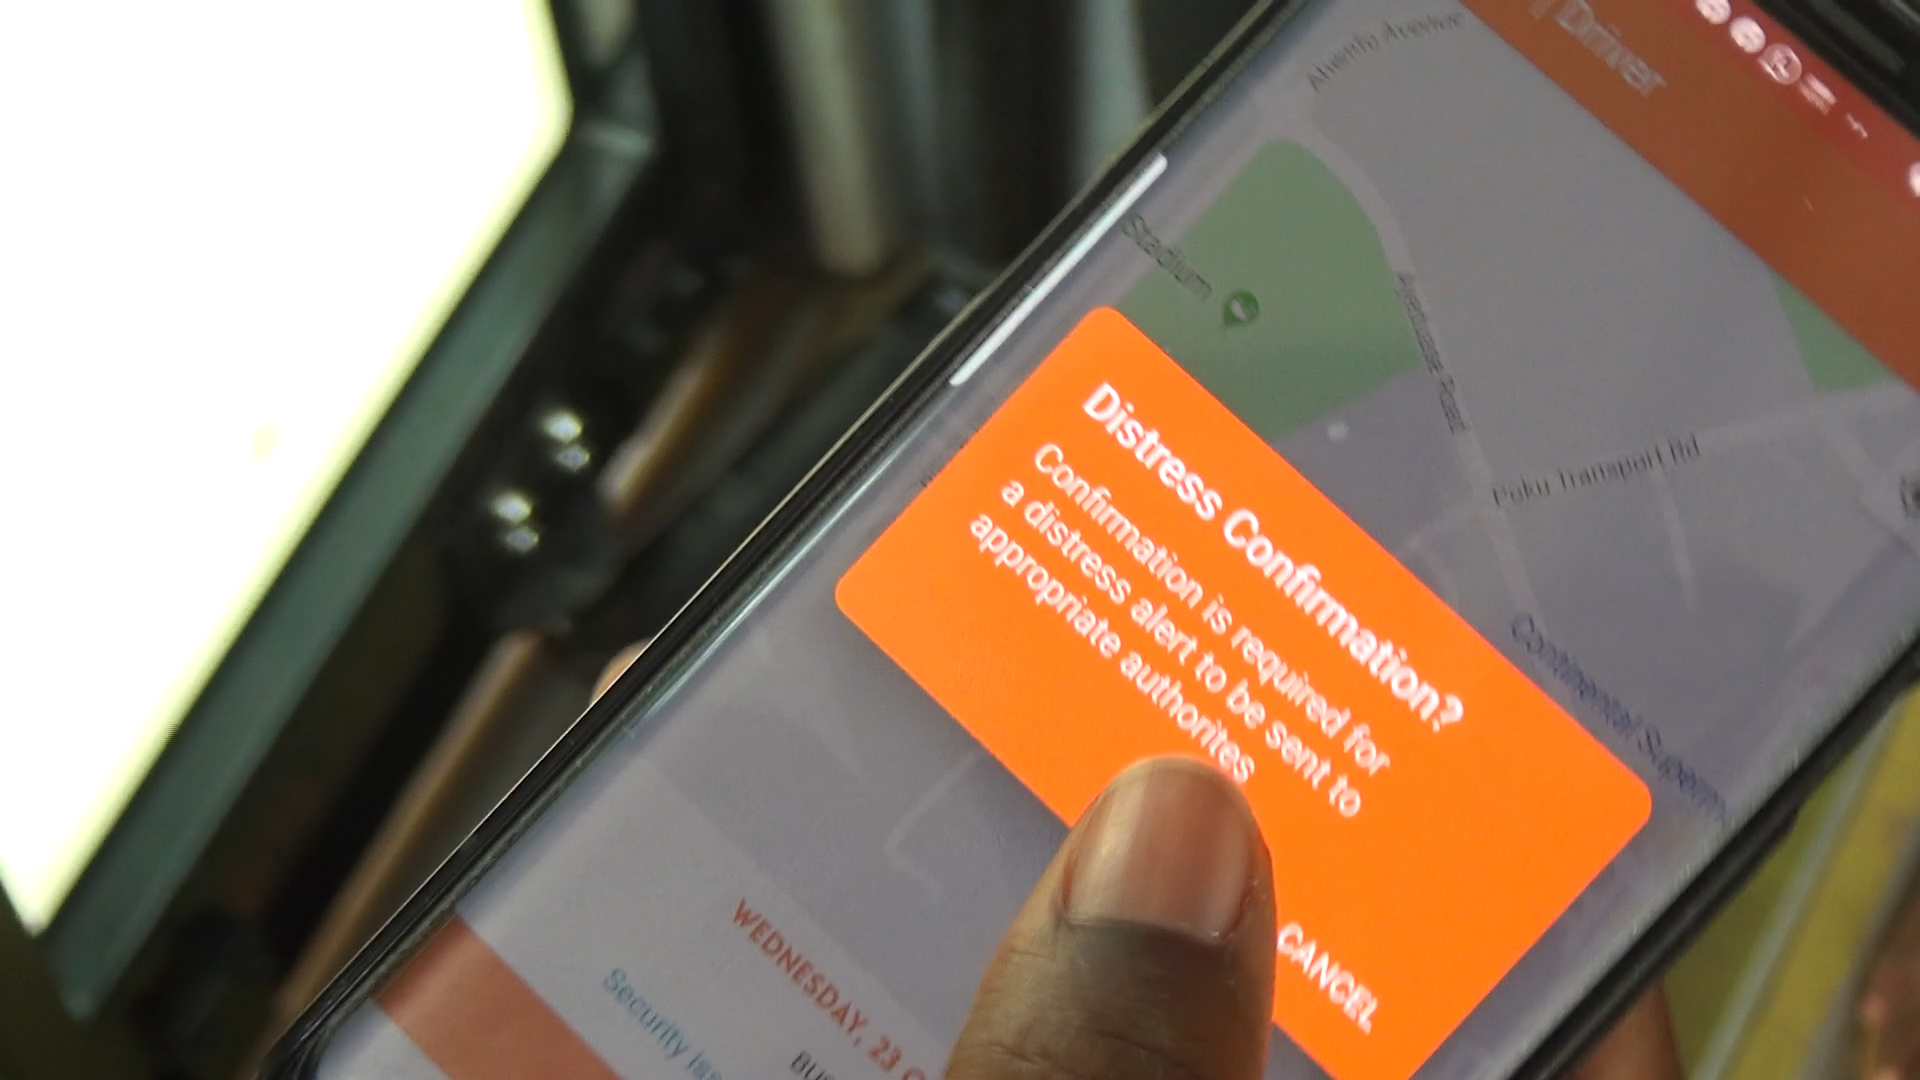 KNUST students develop mobile app to help people report emergency cases